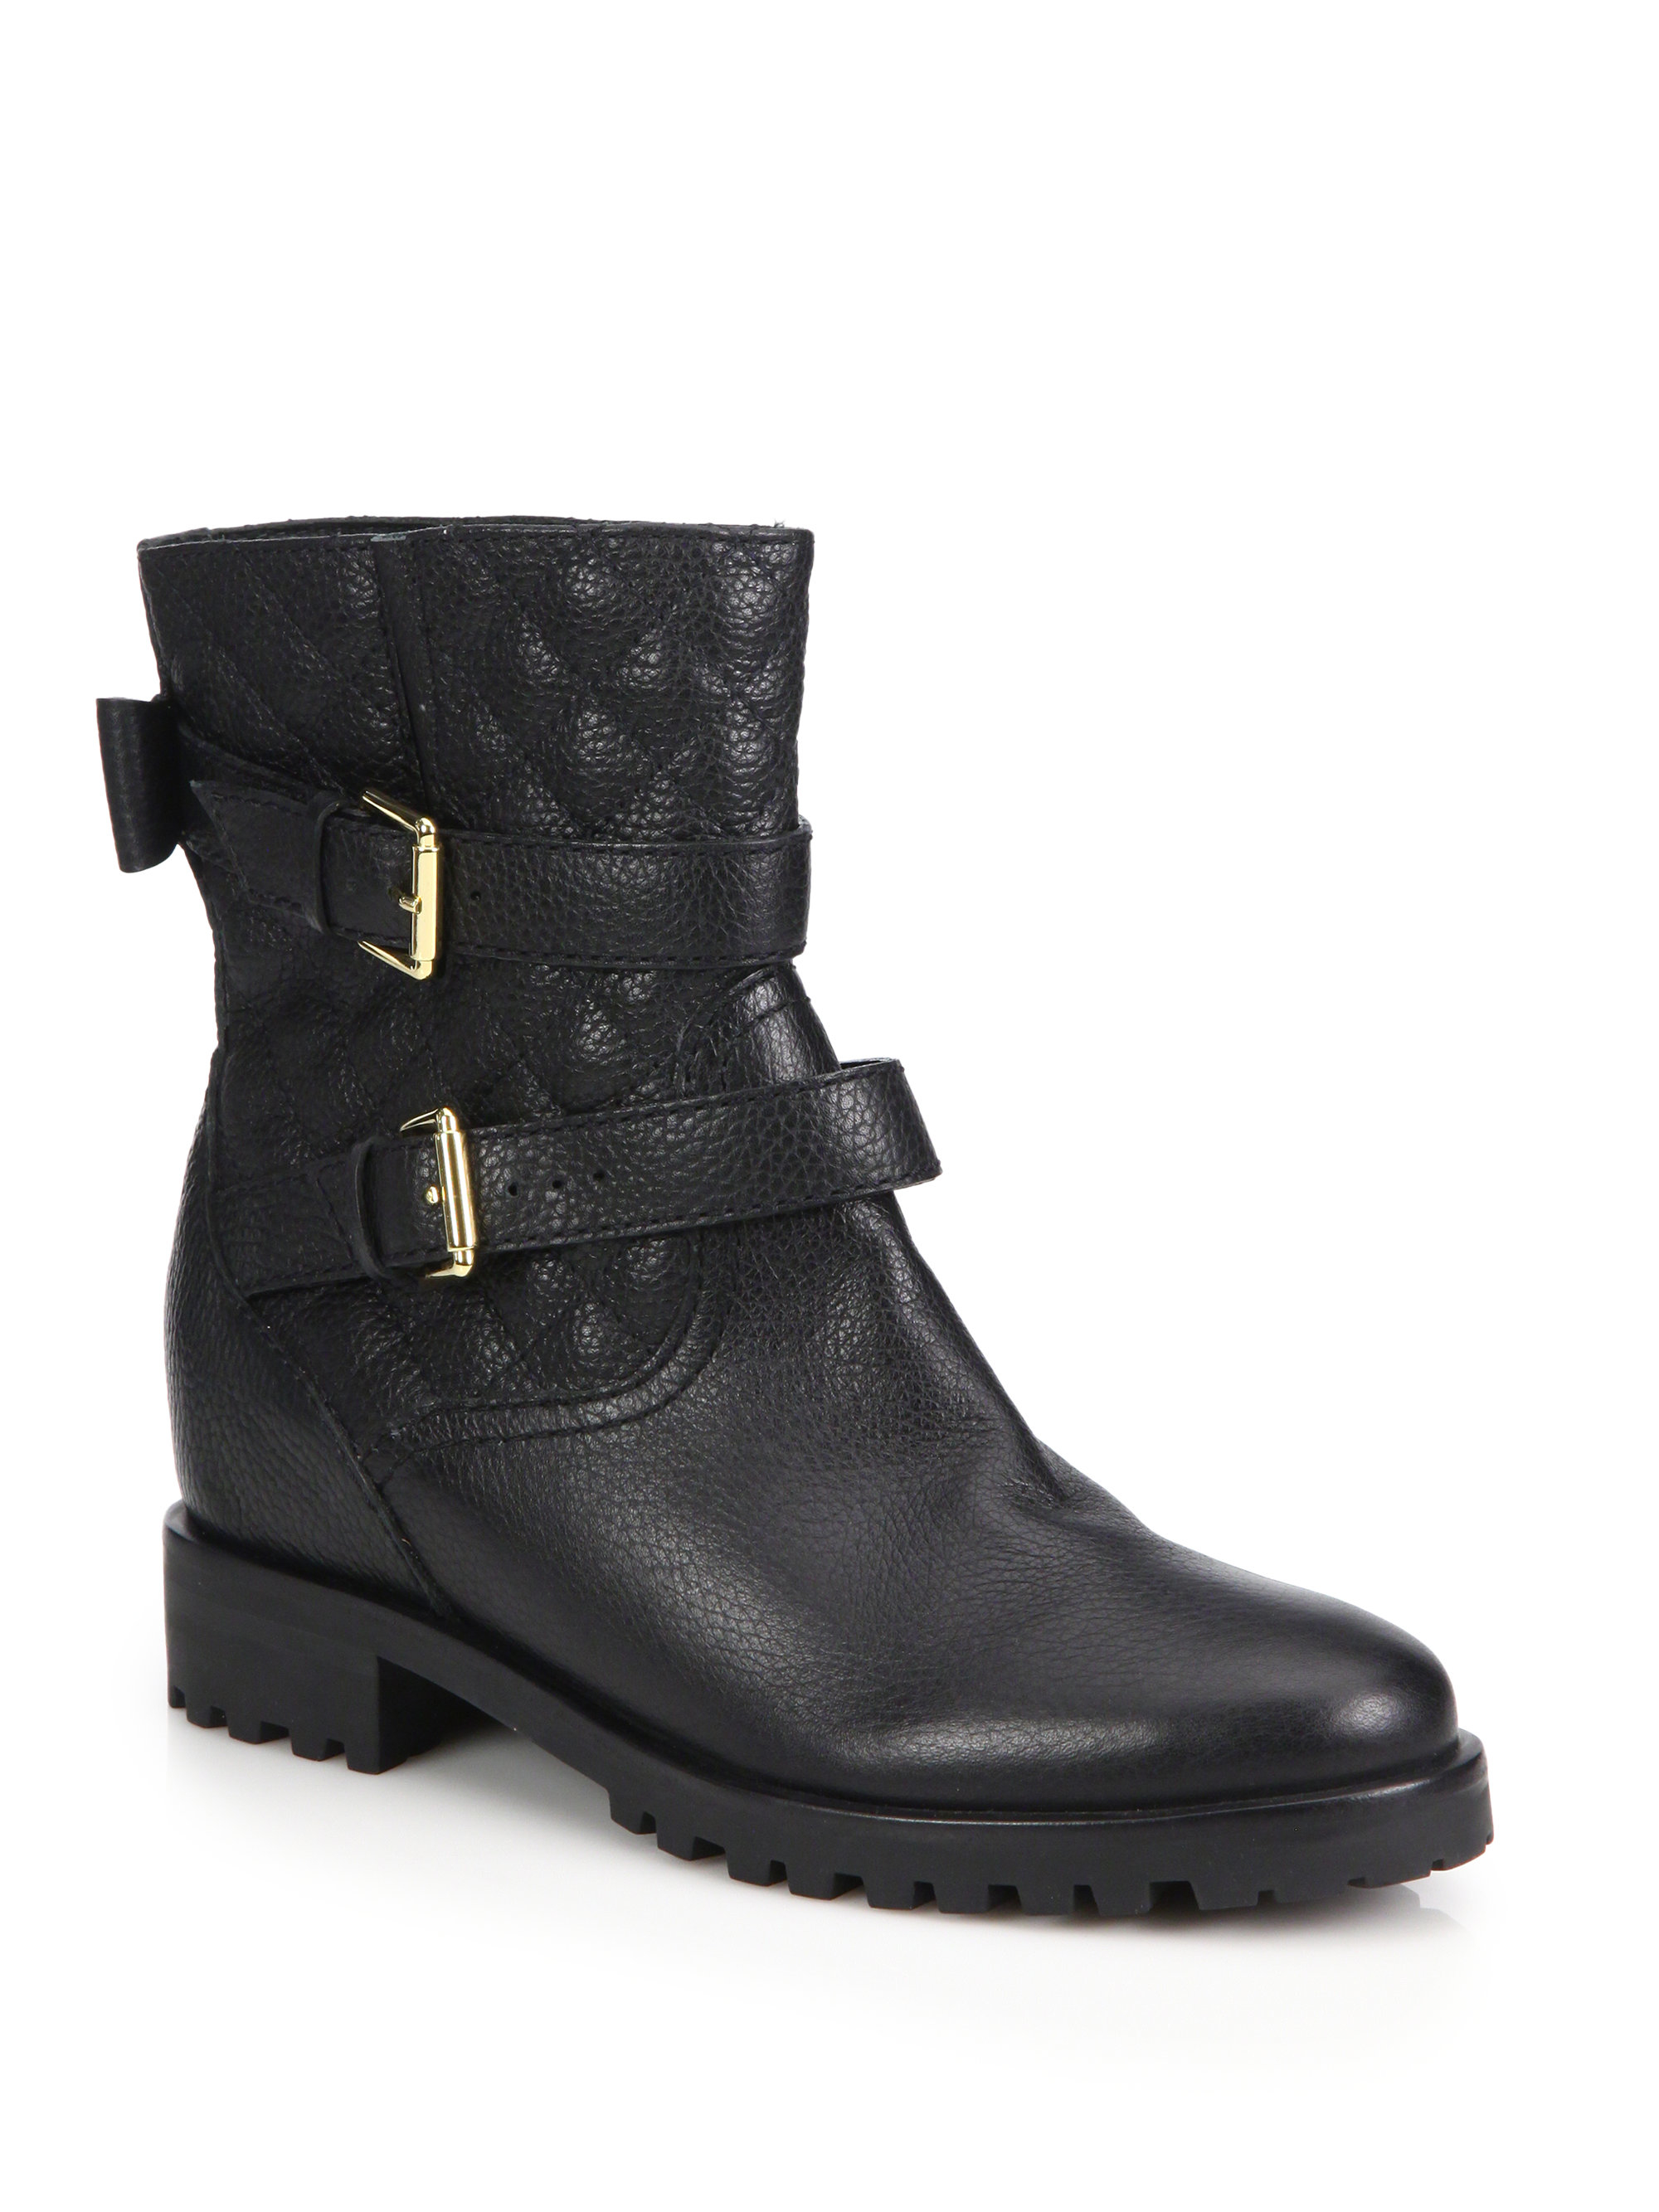 Kate spade new york Samara Quilted Leather Boots in Black | Lyst